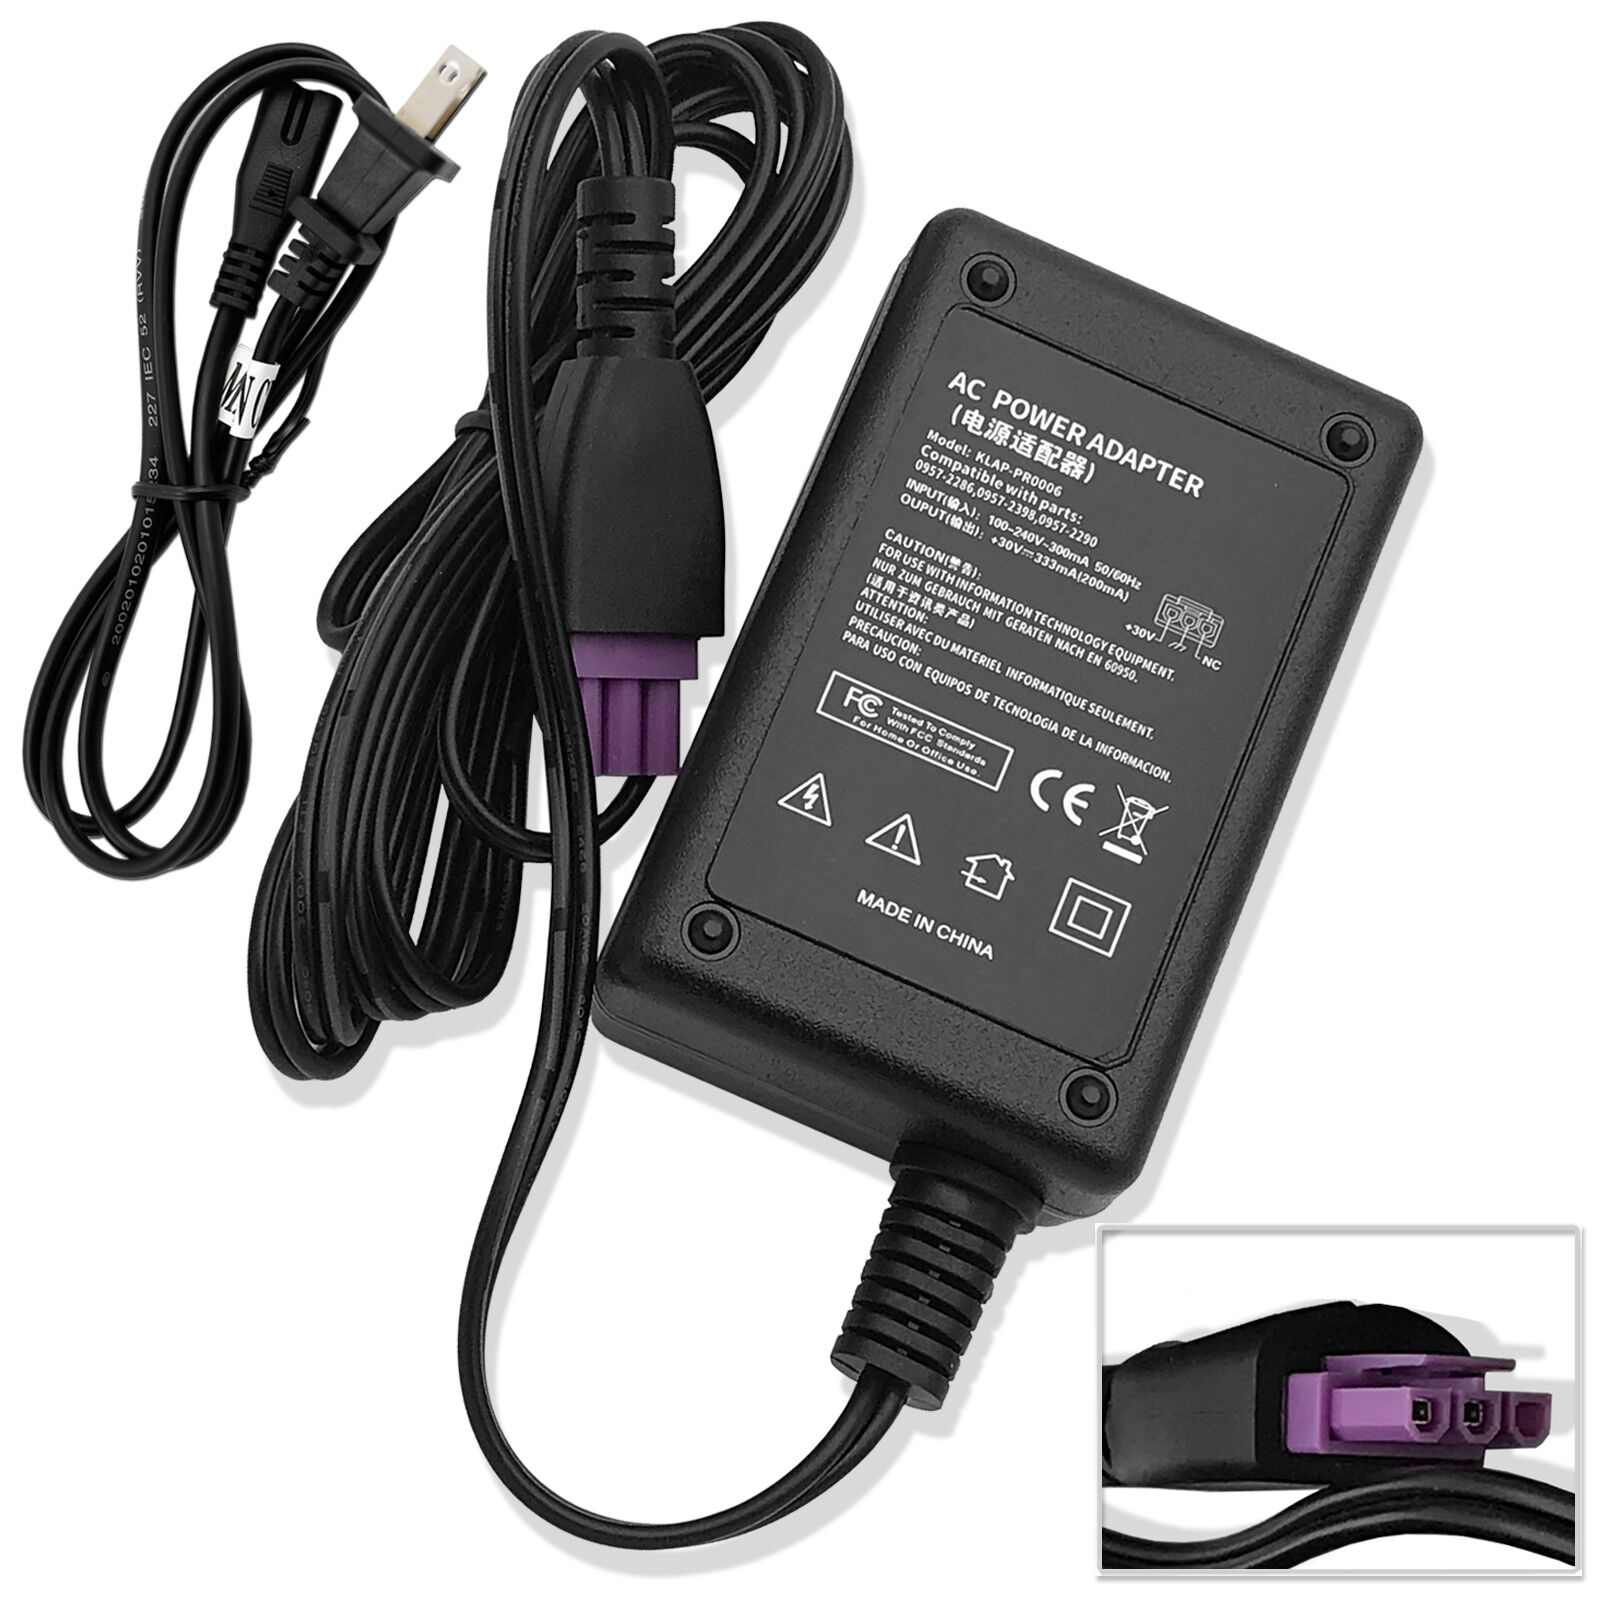 AC Power Adapter Charger Cord For HP Deskjet 2000 2050 2054A 2510 2511 Printer